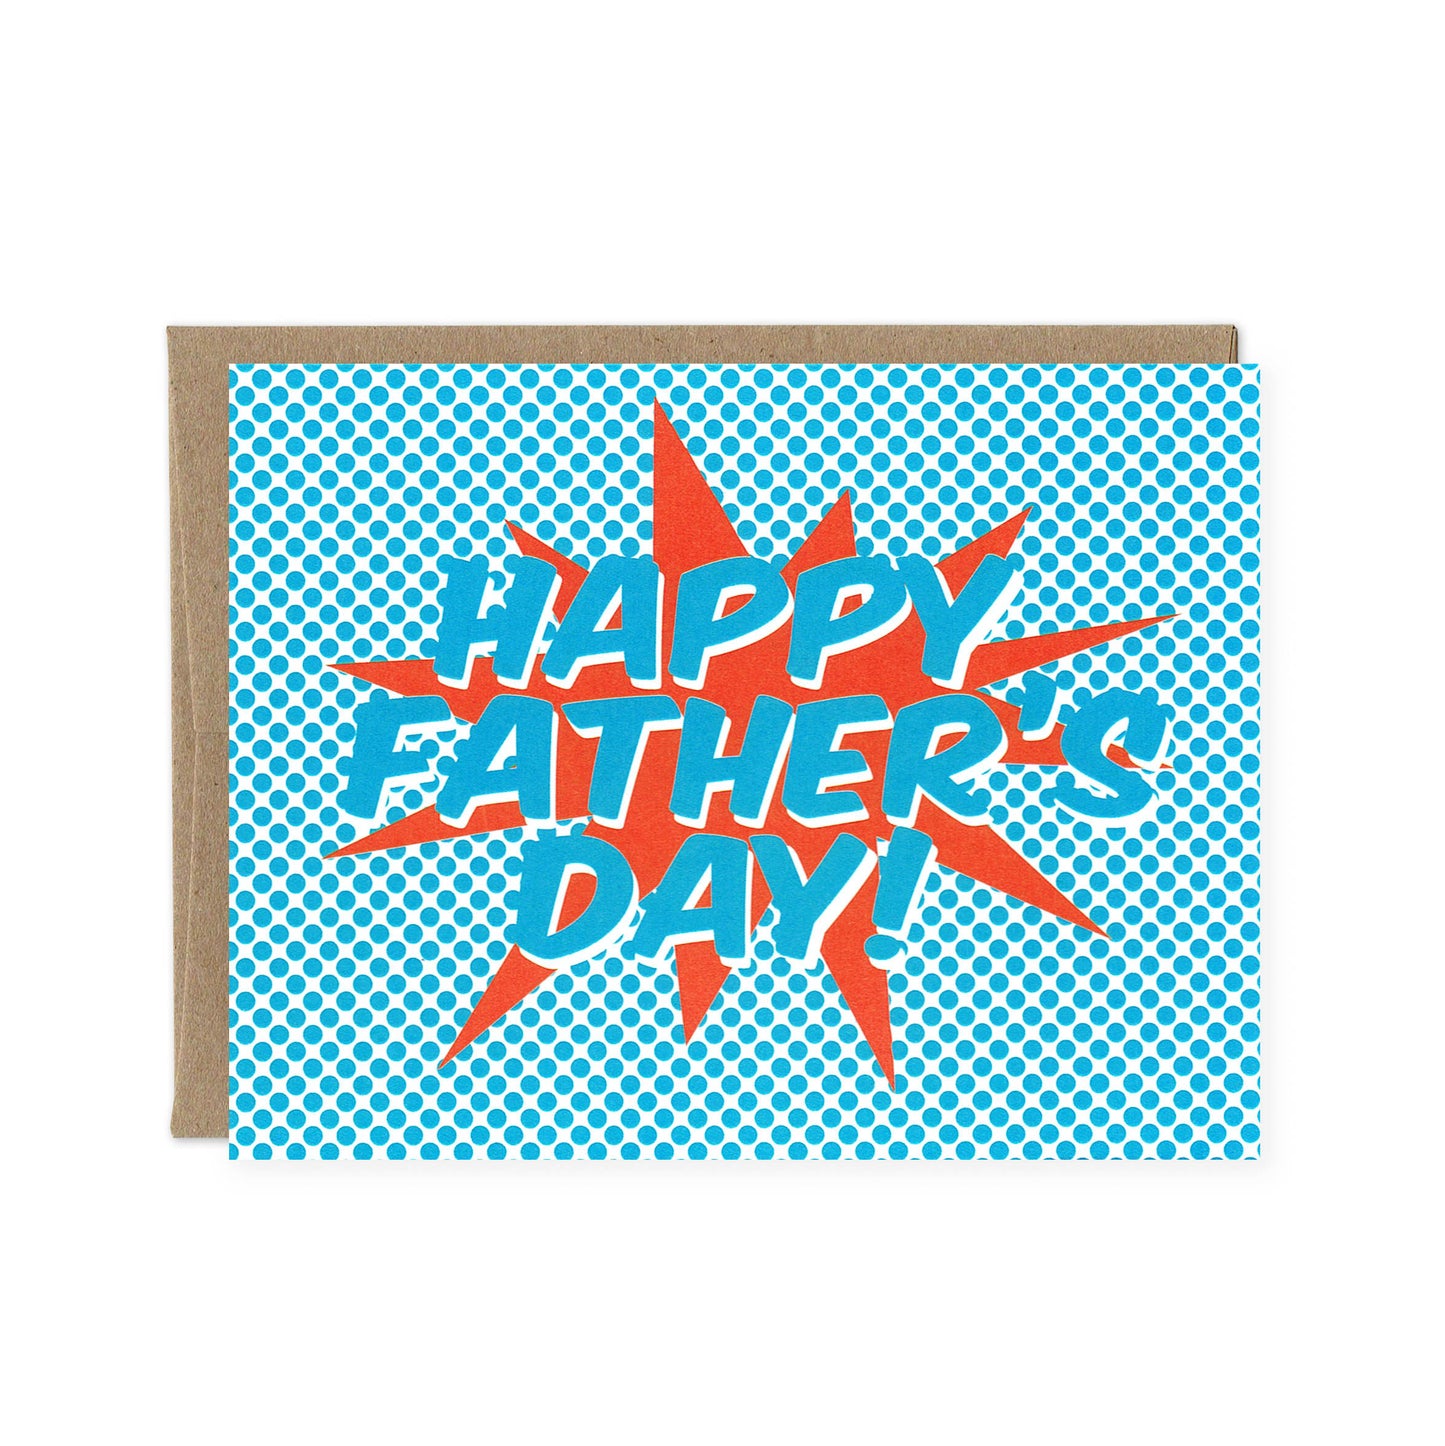 A pop art style card, featuring small blue dots and "Happy Father's Day!" text